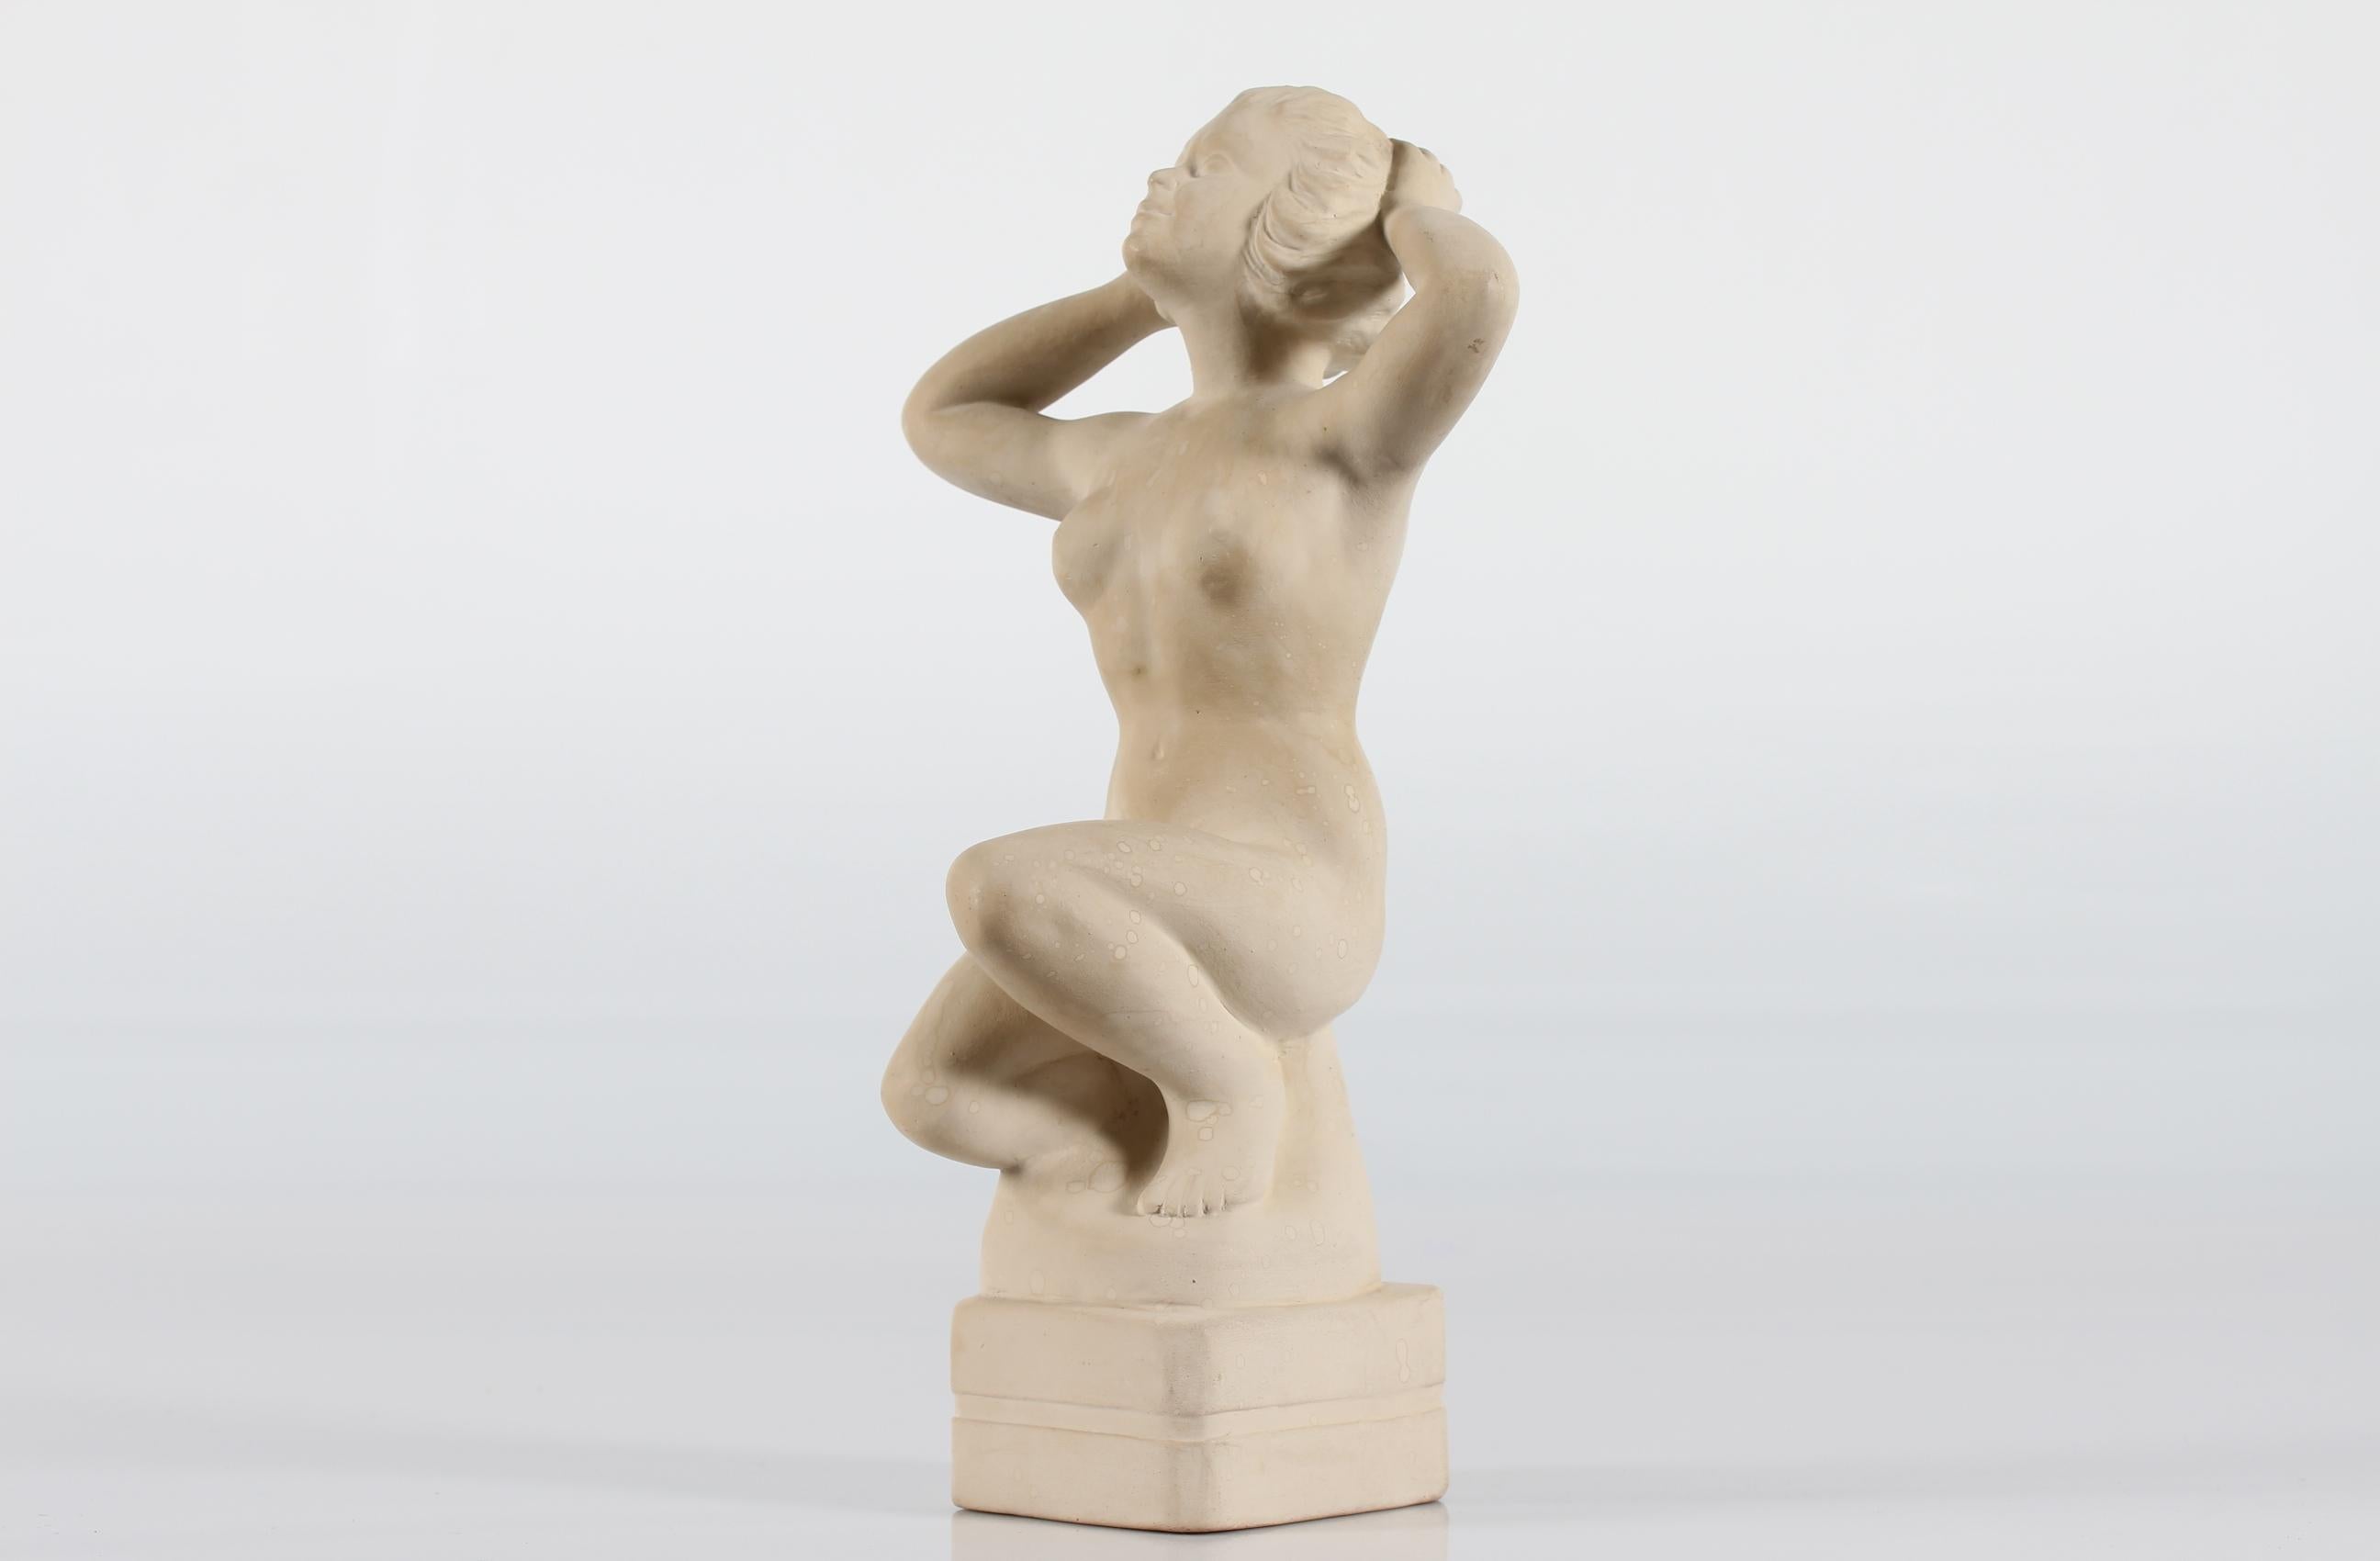 Ceramic figurine of a sitting young woman designed by Ove Fritz Rasmussen (1911-1973) 

The figurine is decorated with off white matte glaze and signed with the monogram OR

Measures: Height 38 cm
Width 20 cm

Nice vintage condition with